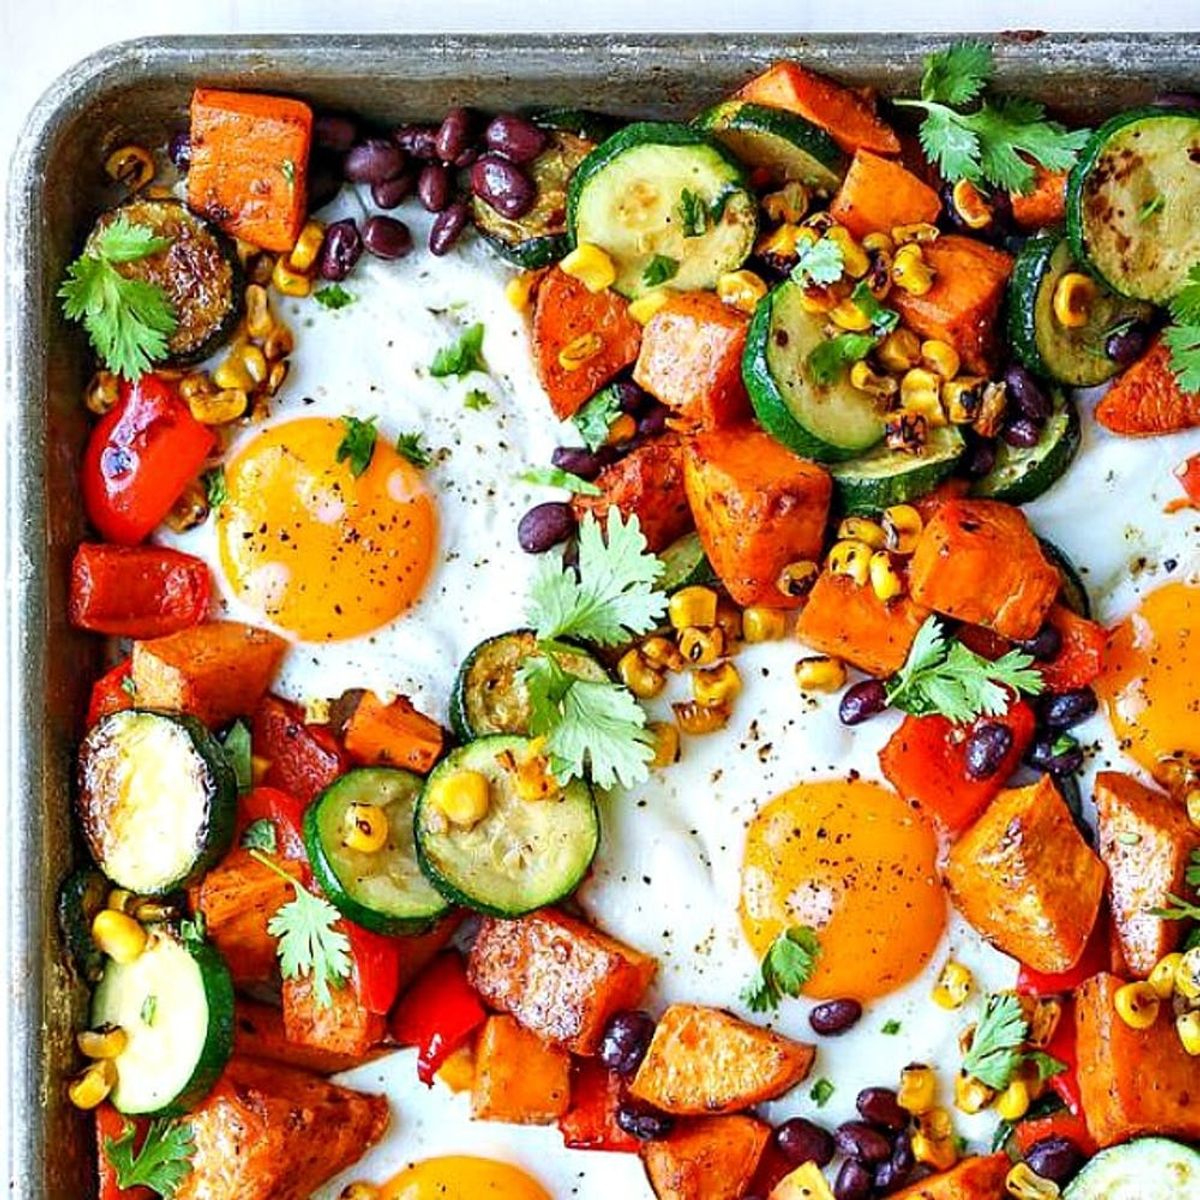 11 Vegetarian Sheet Pan-Inspired Dinner Recipes You Wouldn’t Believe